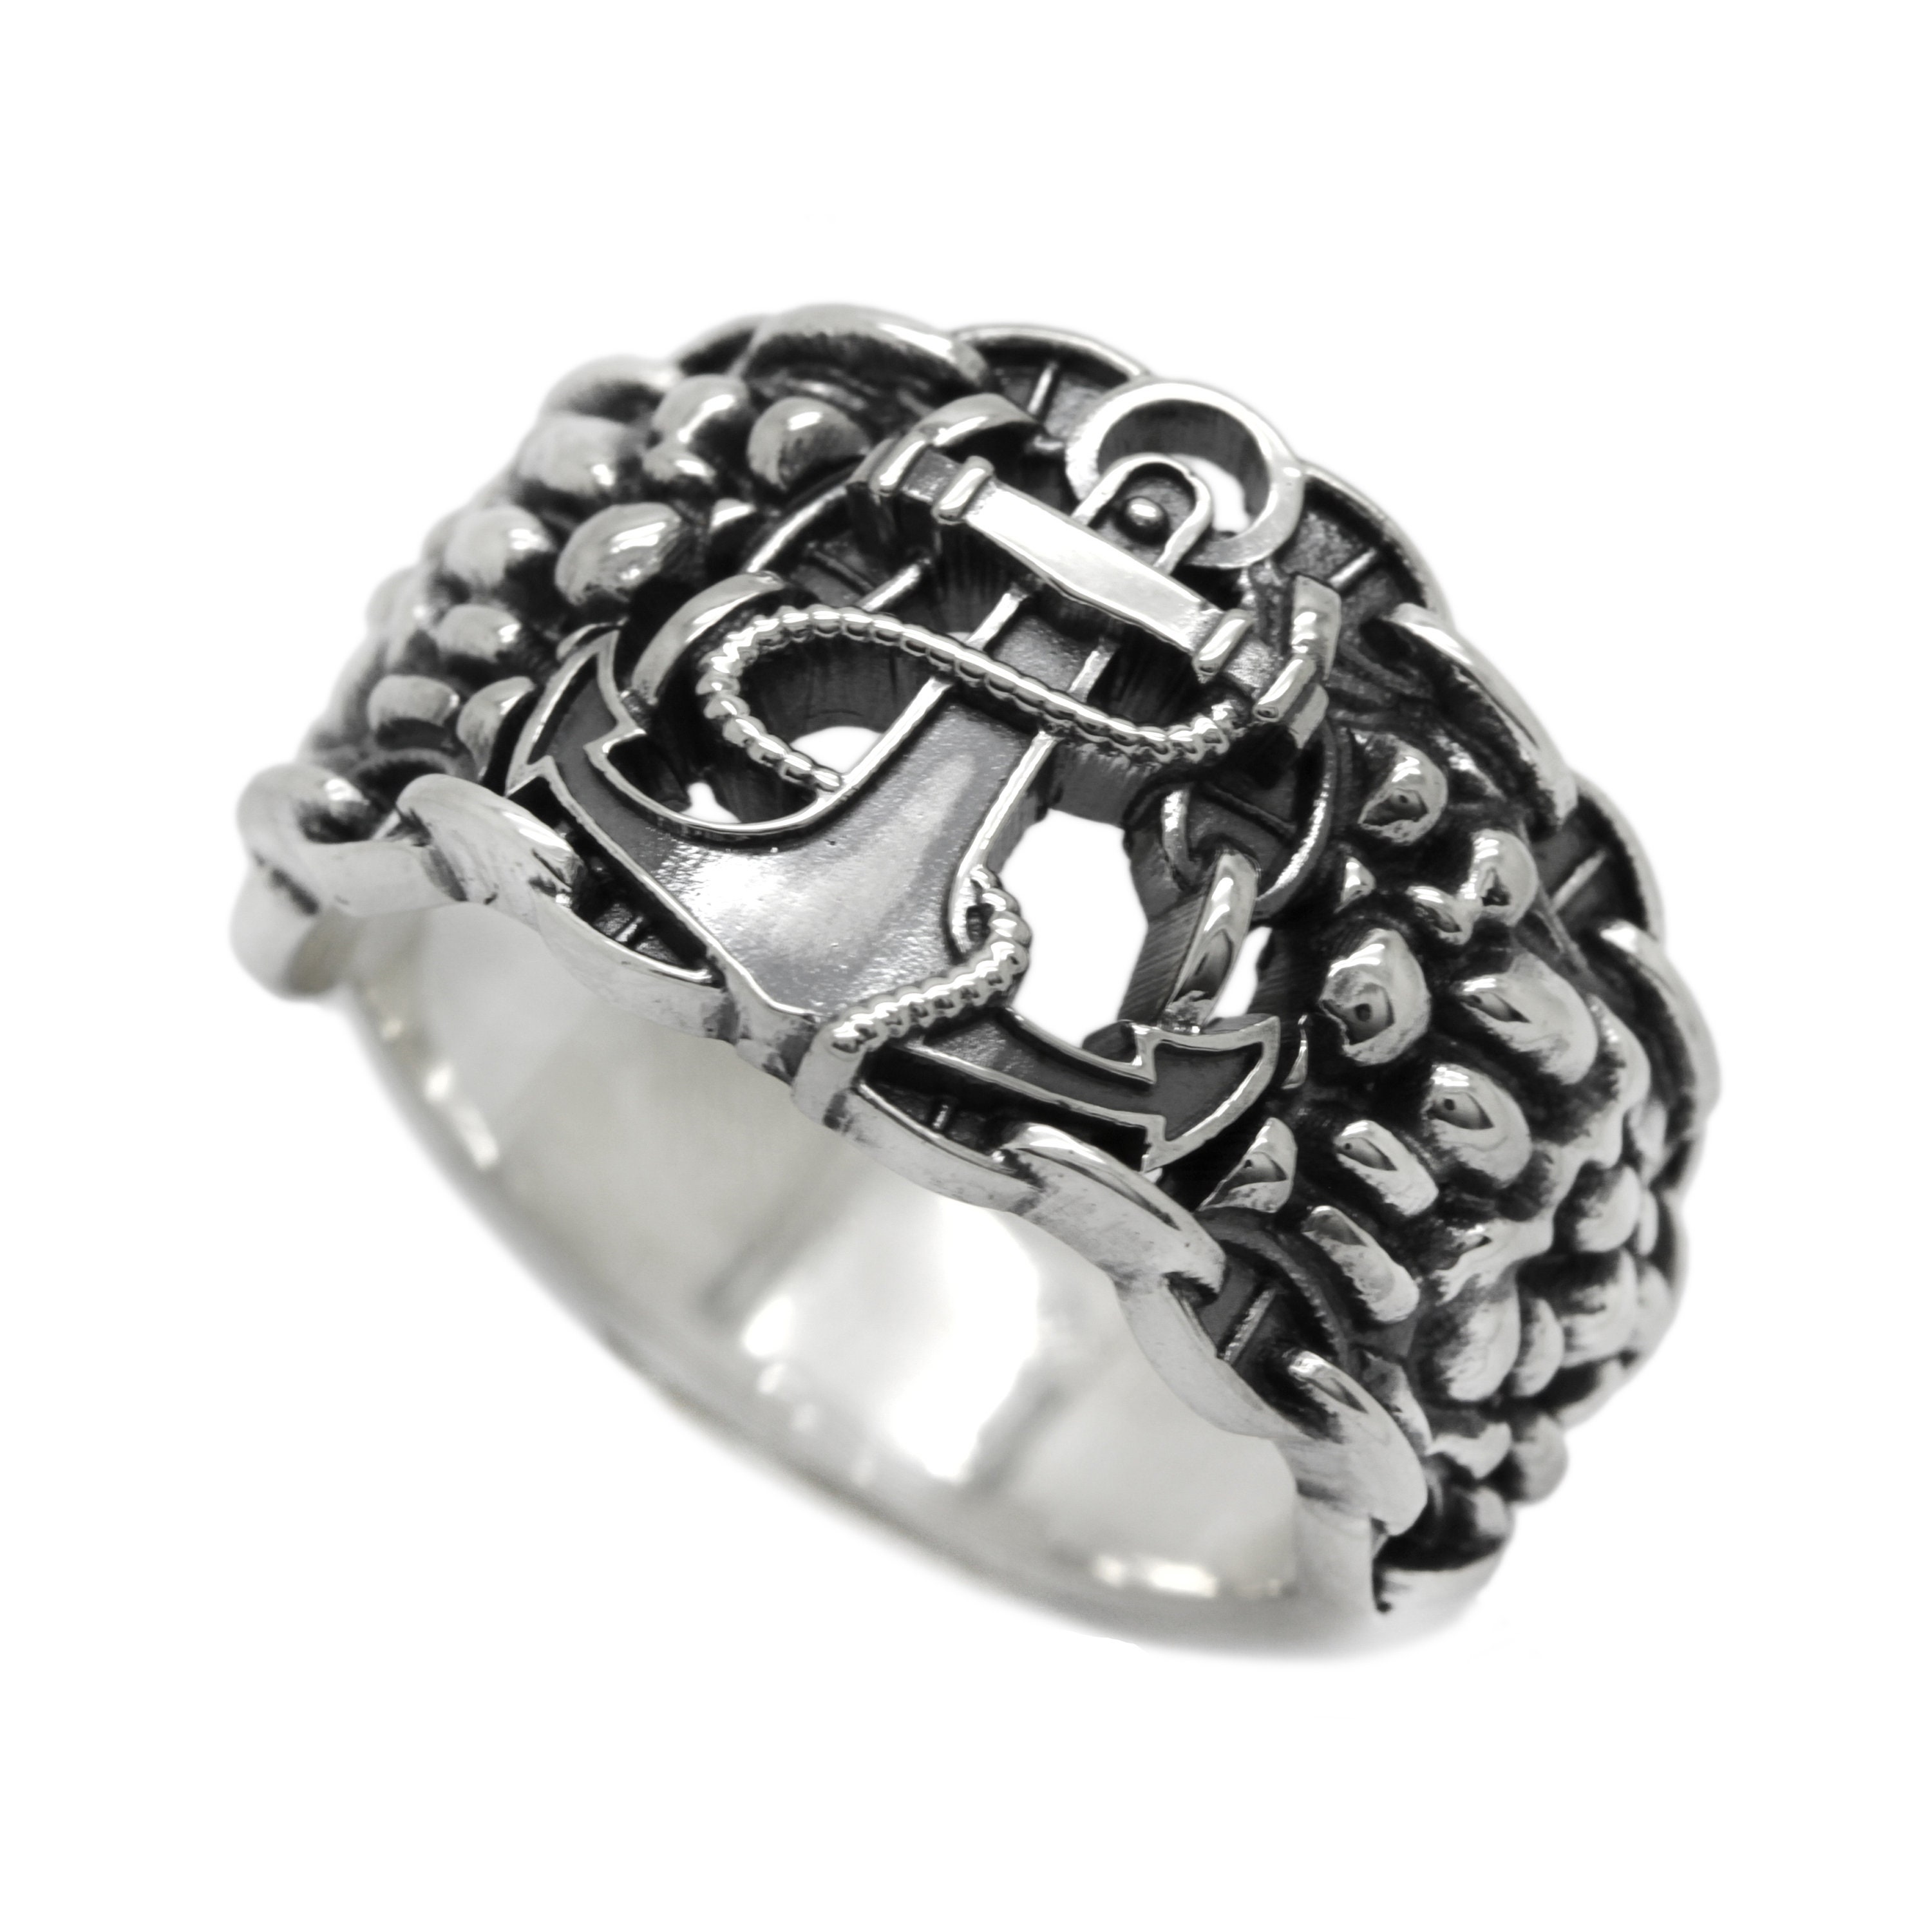 Details about   Sea Anchor and Chain Men's Sterling Silver Ring 